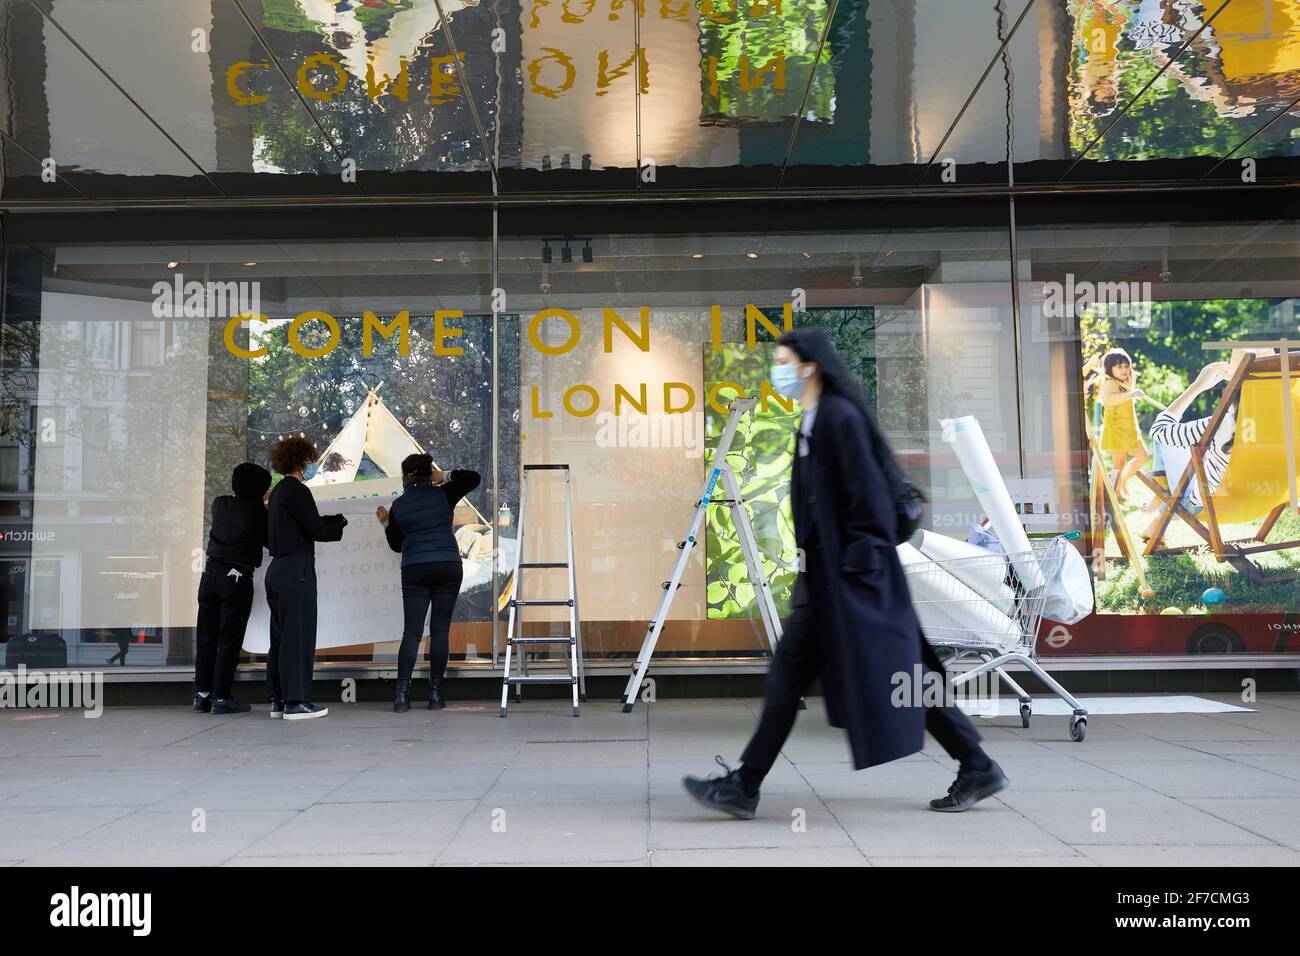 London, UK - 6 Apr 2021: Employees at the John Lewis store on Oxford Street affix signs welcoming shoppers back in advance of lockdown roadmap rules in England that allow shops to reopen on 12 April. Stock Photo